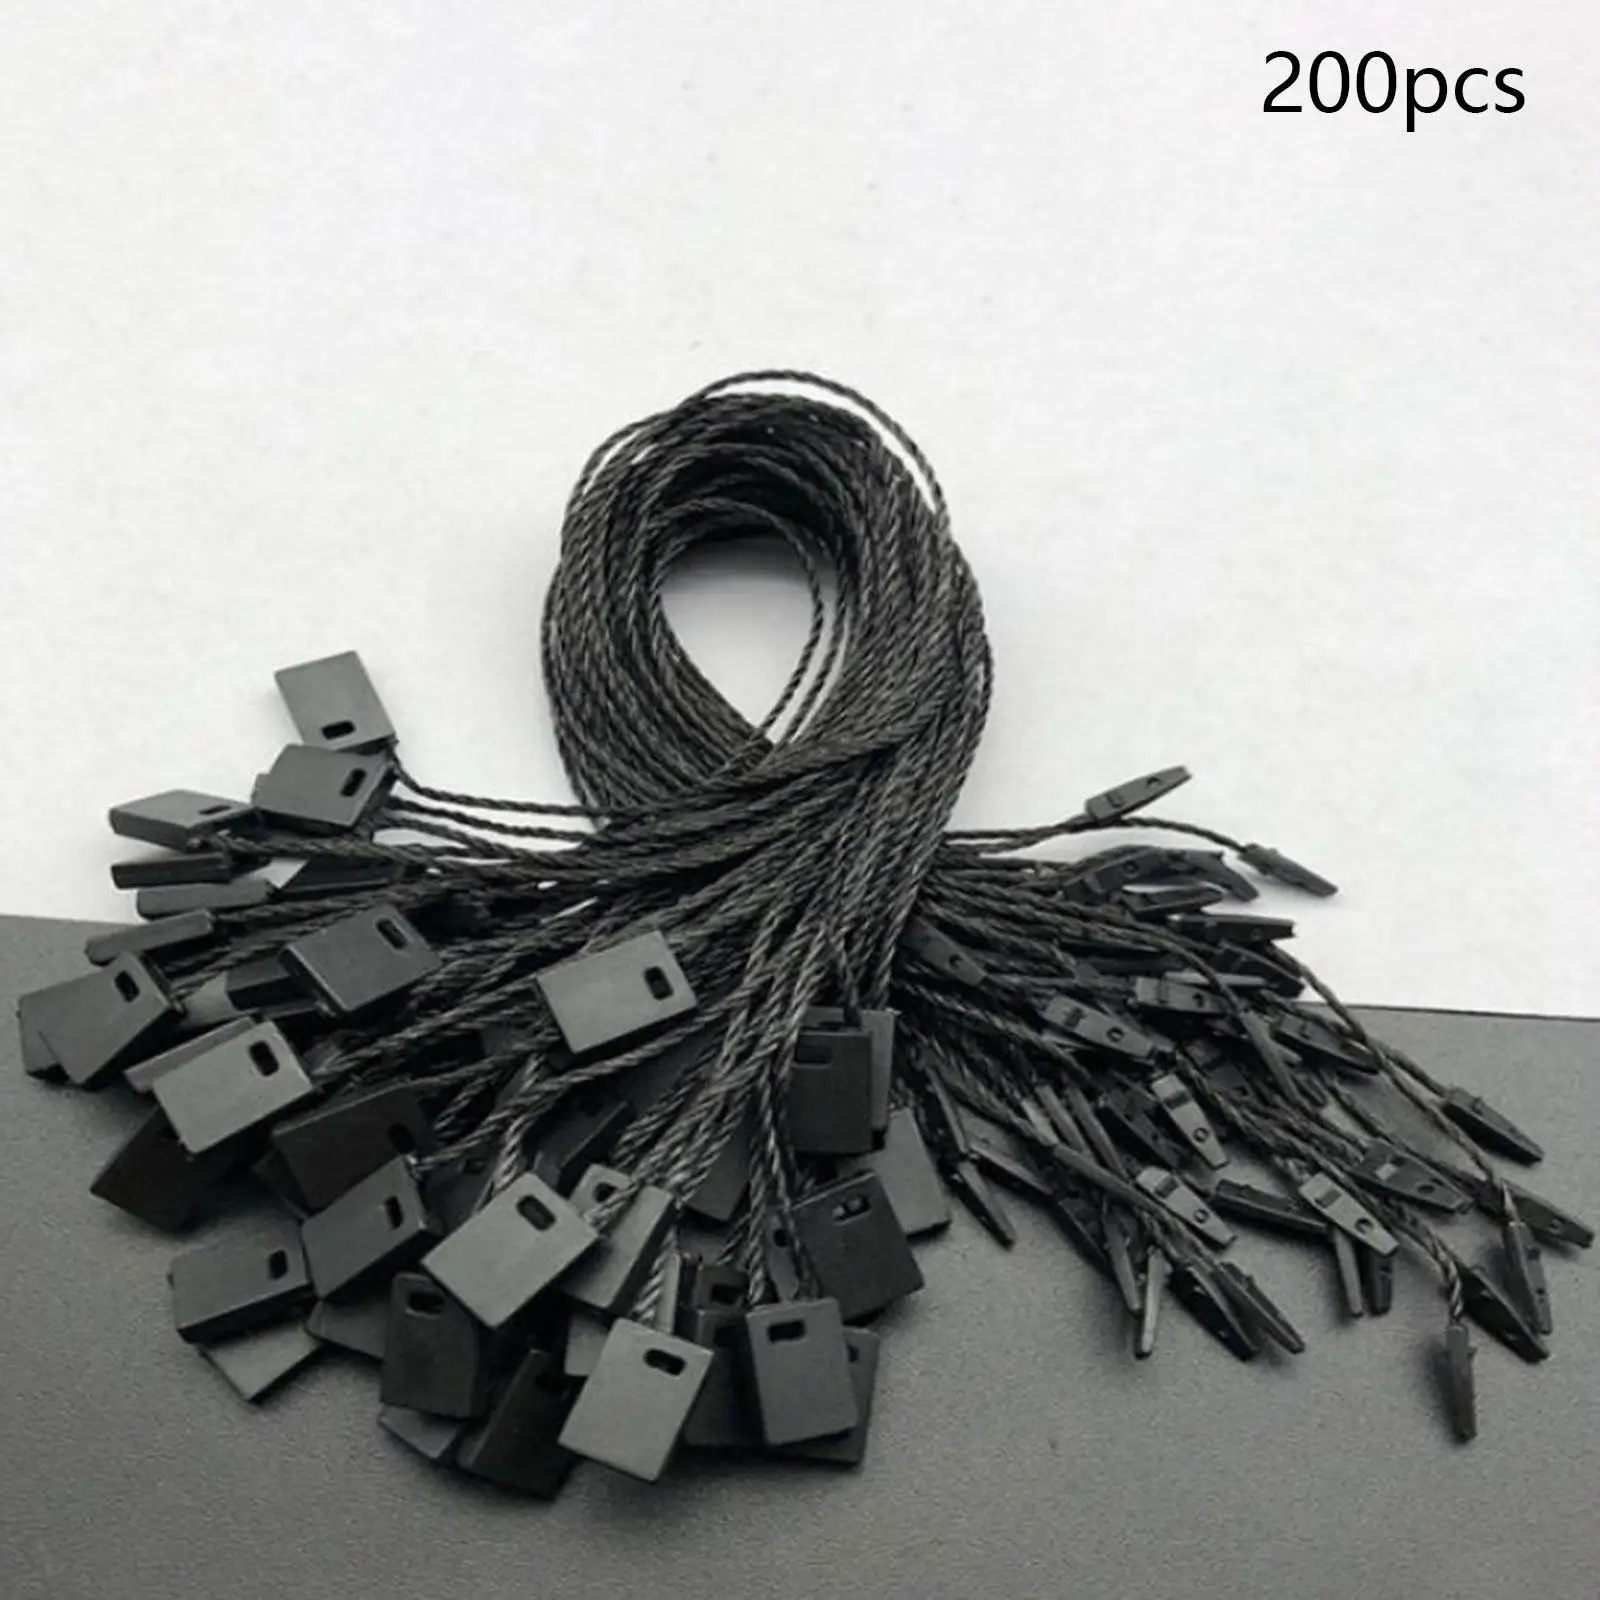 200Pcs Hang Tag Strings Tag Hanging Ropes Fast to Attach Fastener Hook Ties for Labeling Supplies Shoes Jewelry Belt Retail